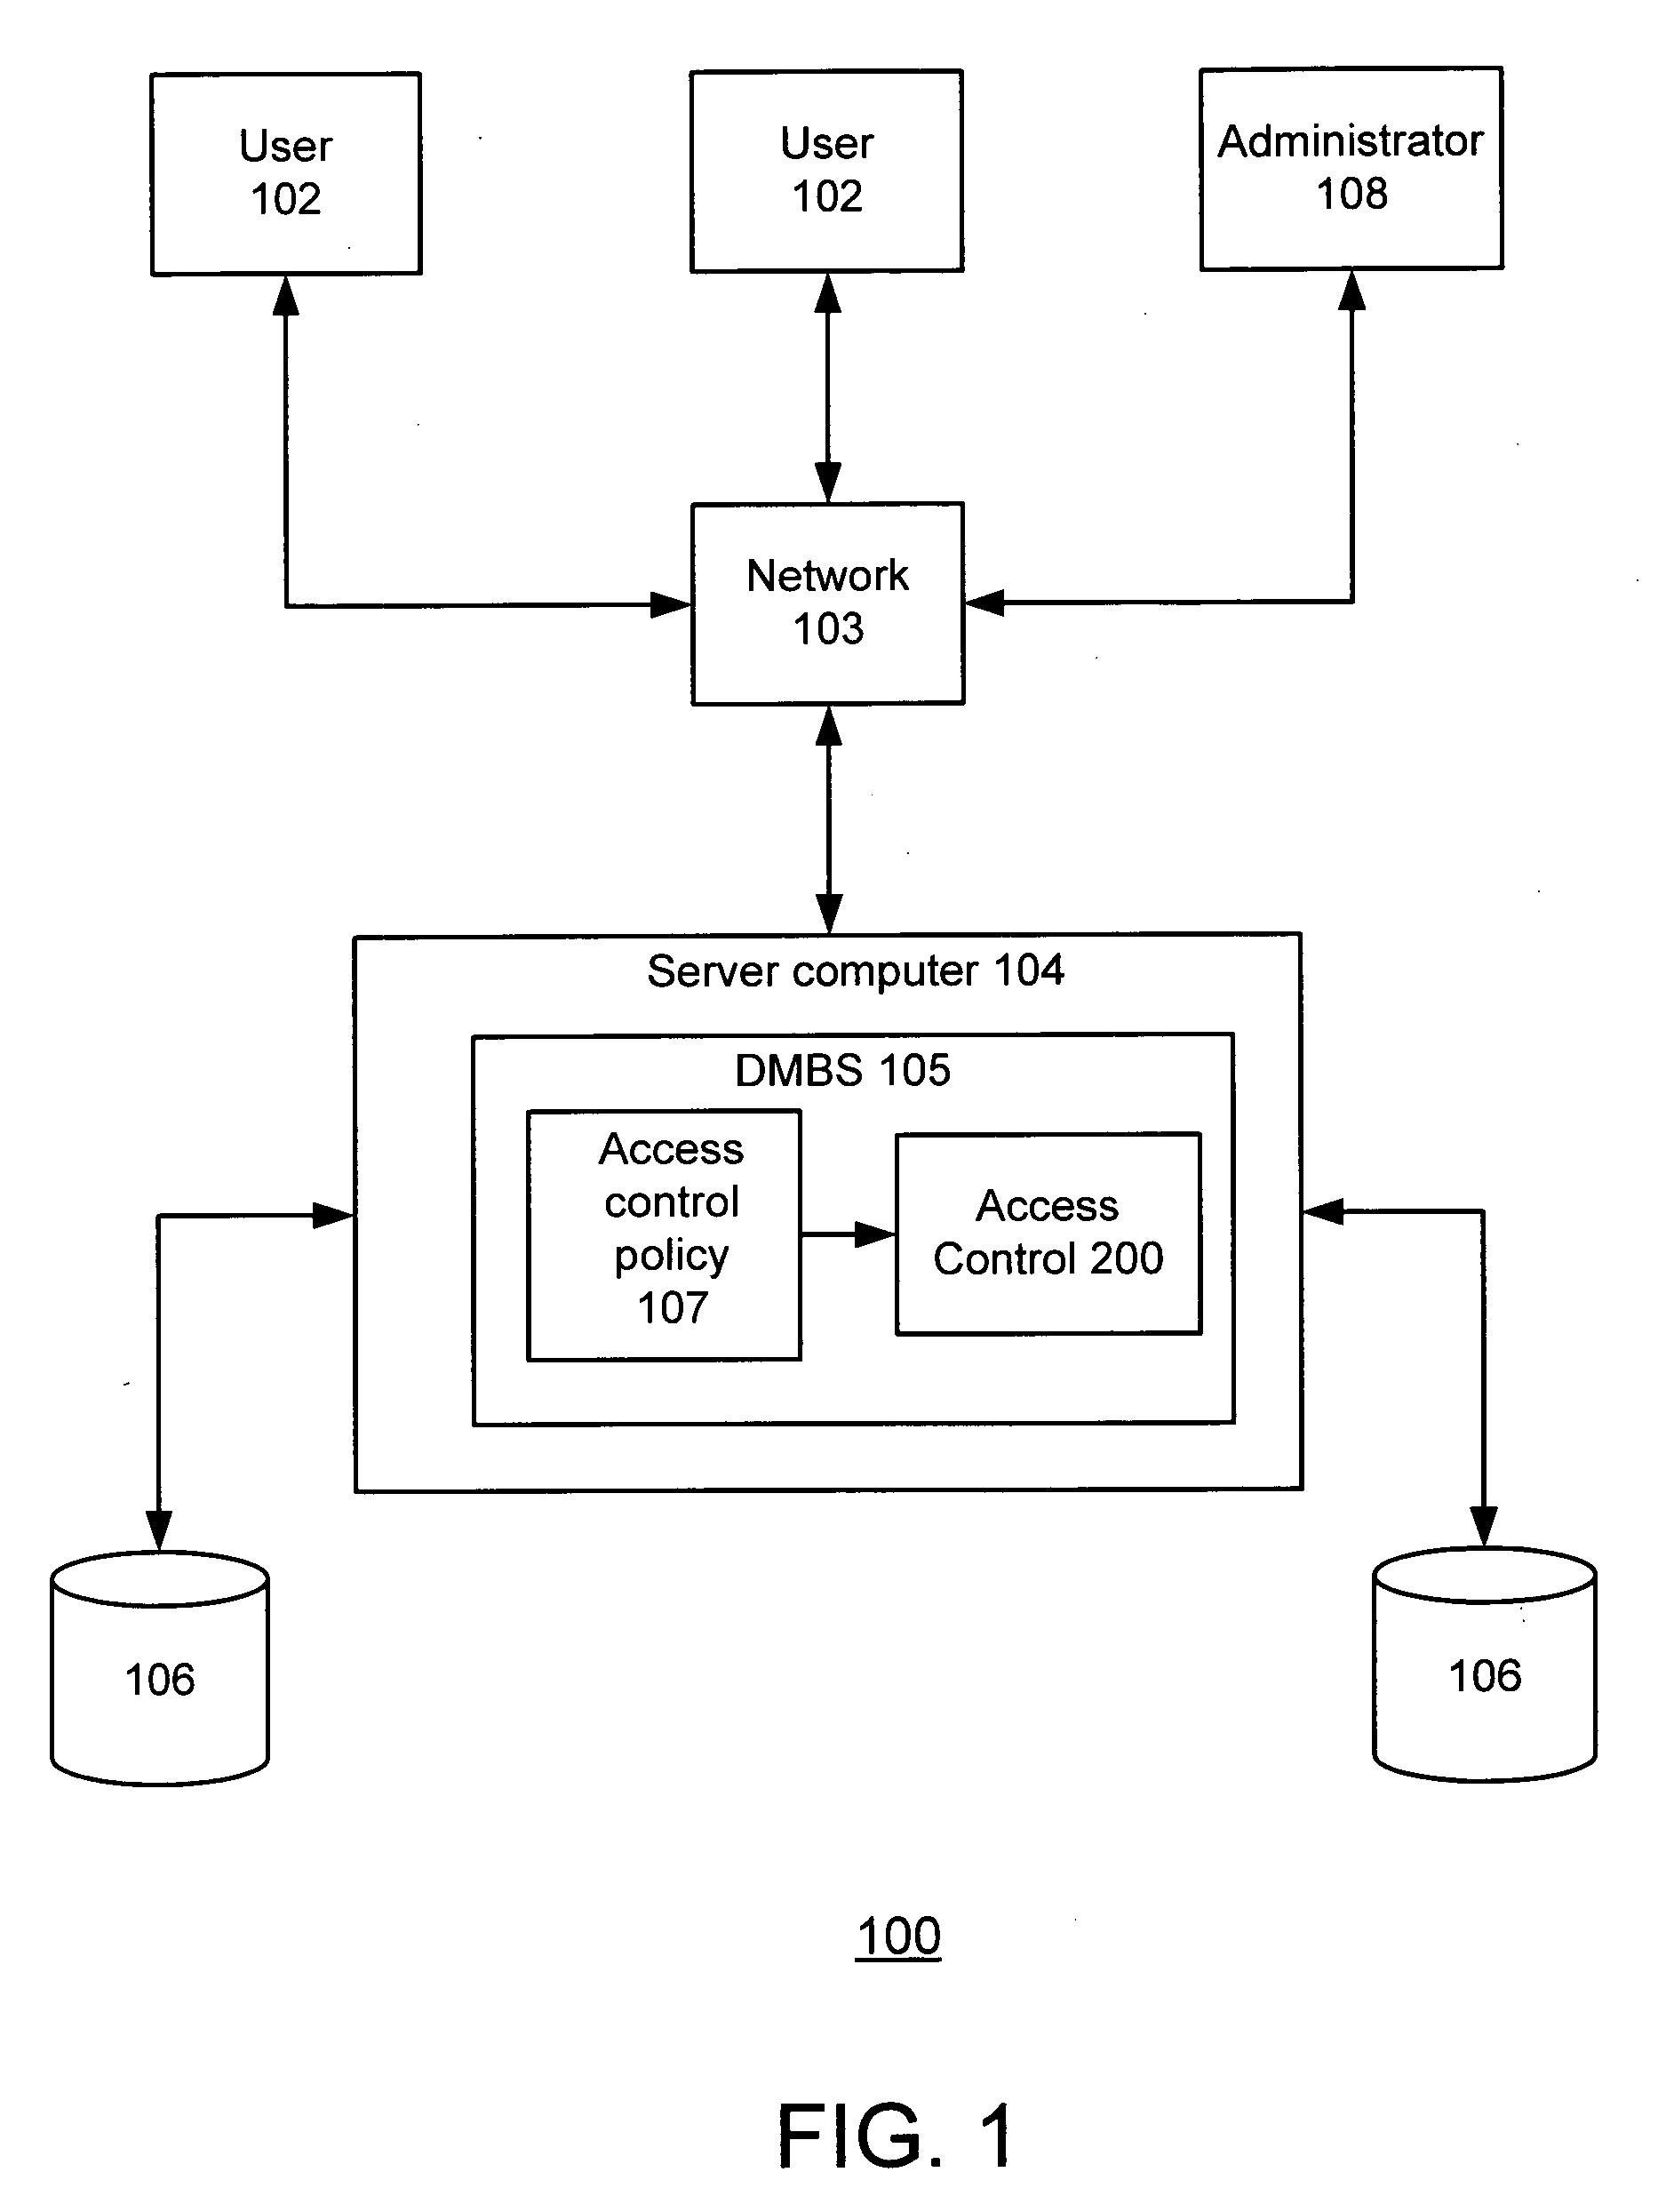 Method and system for providing path-level access control for structured documents stored in a database